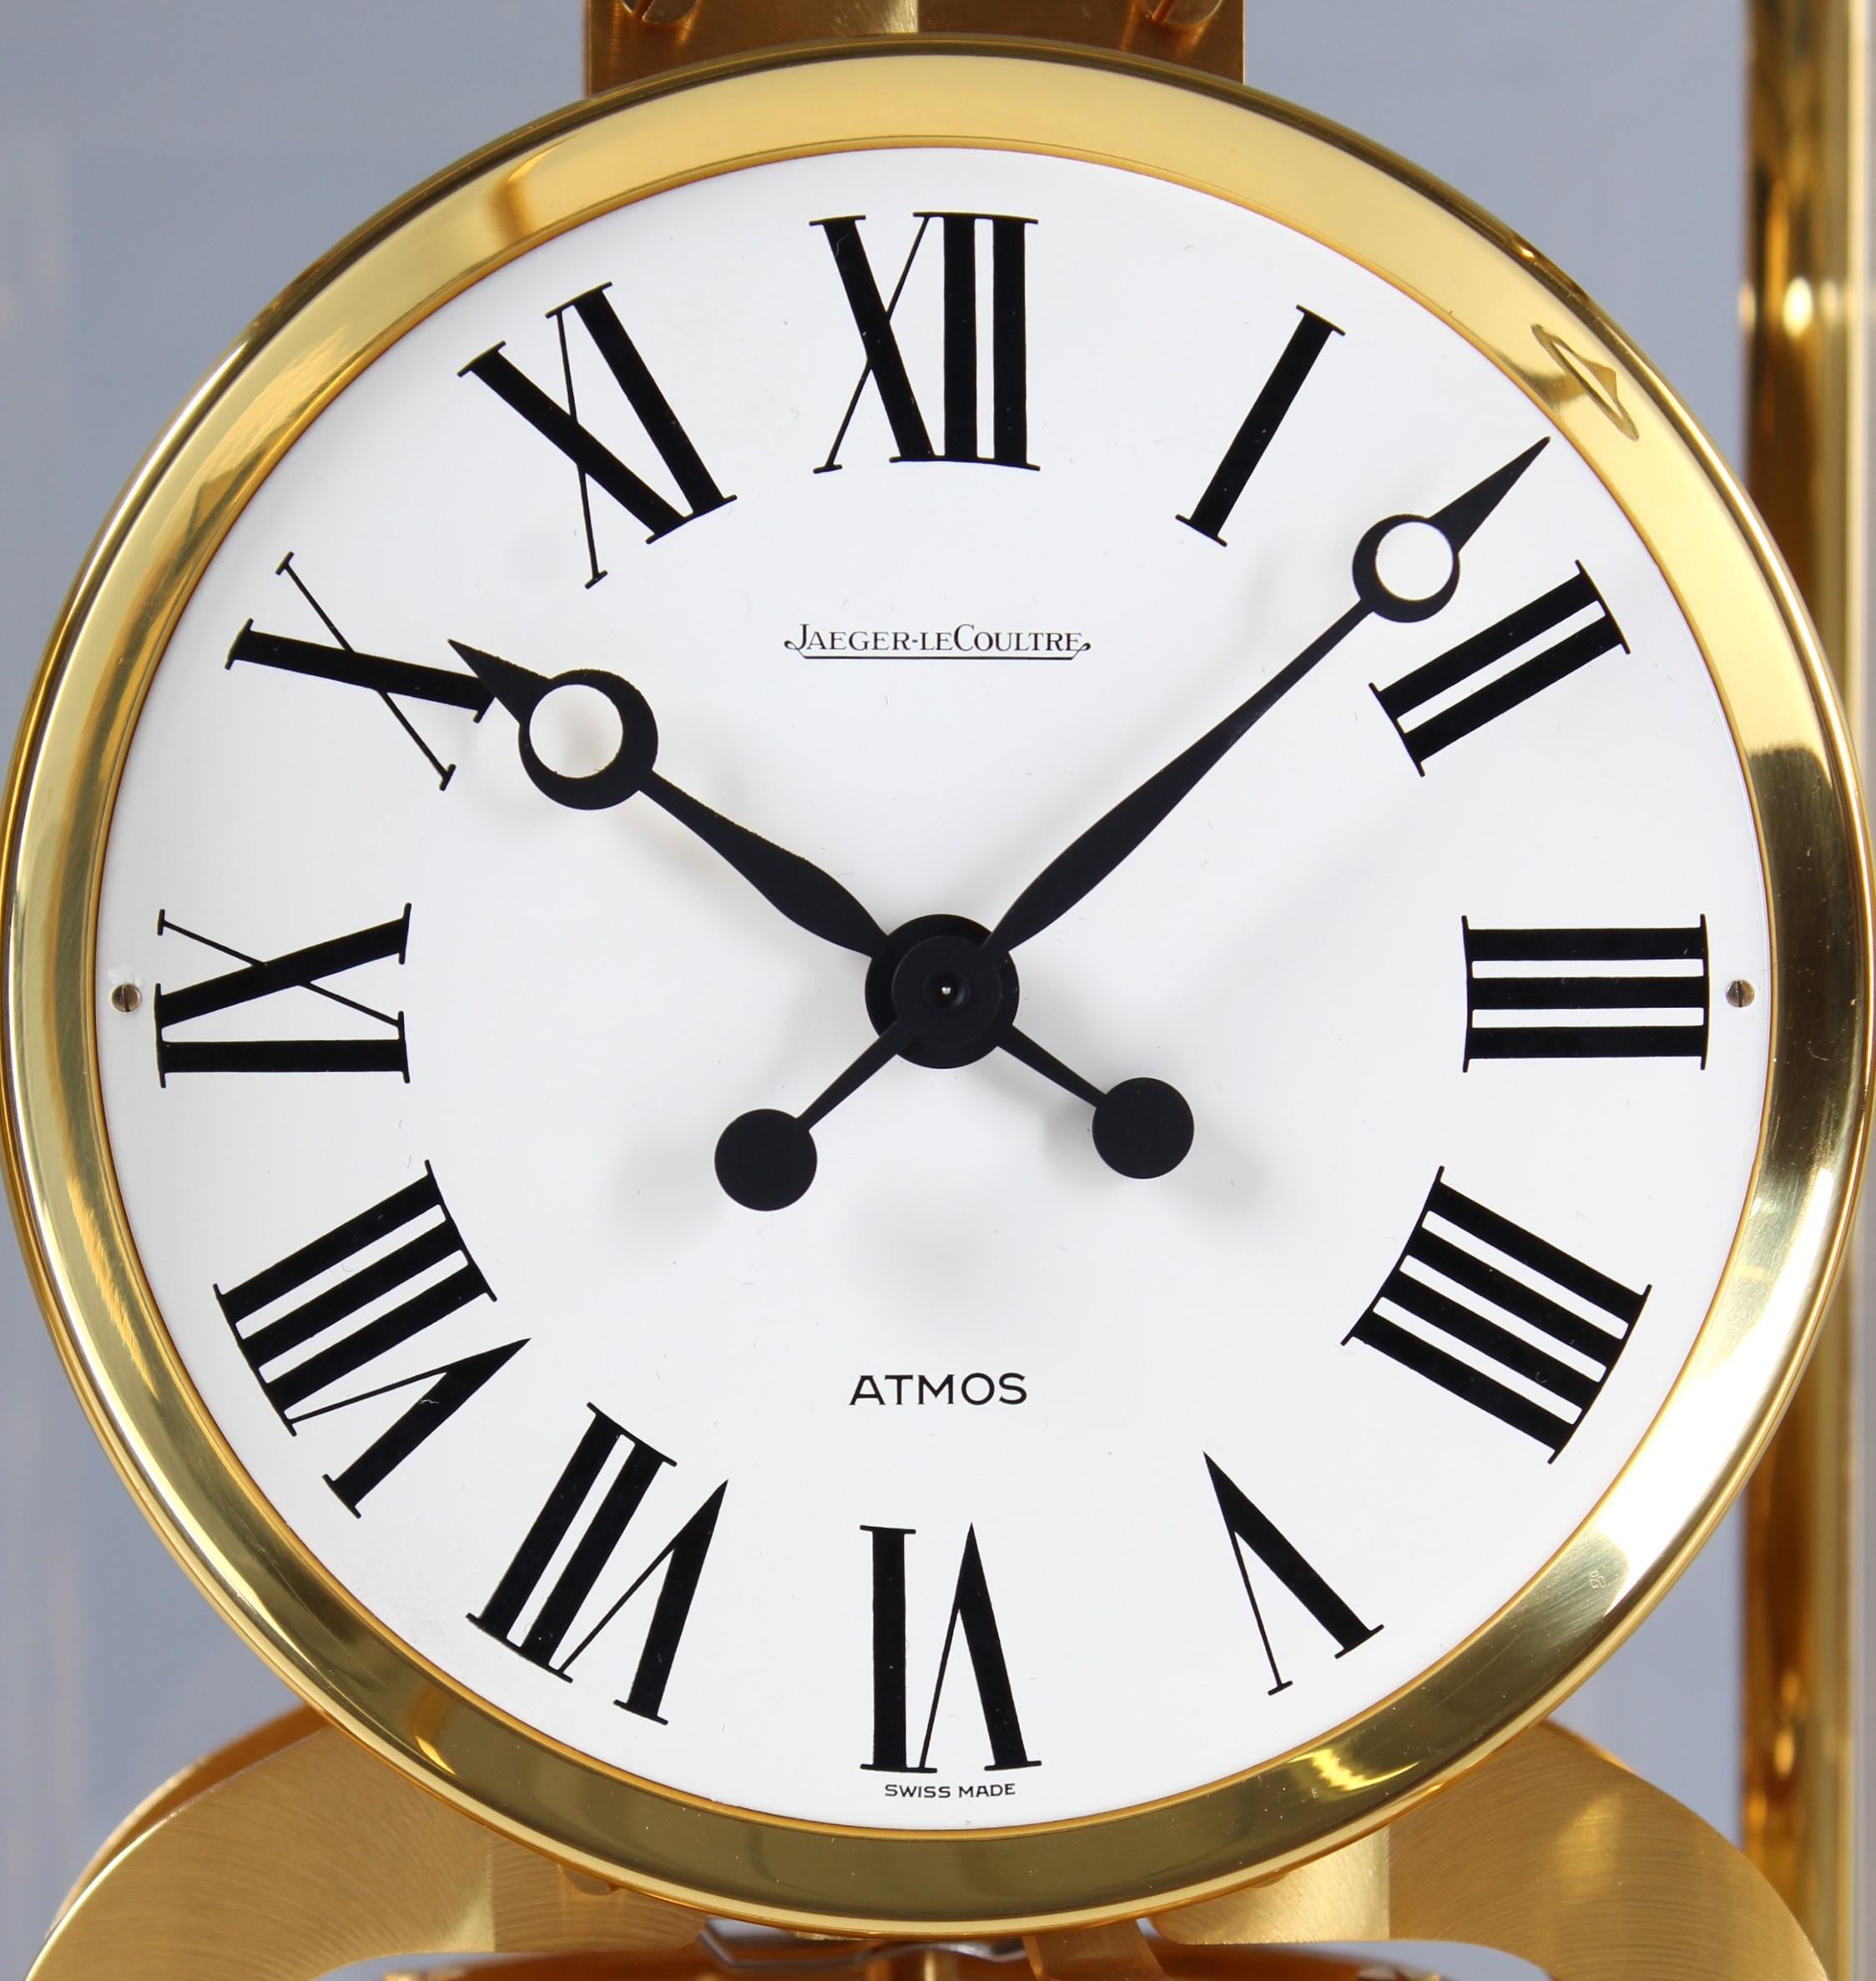 Modern Jaeger LeCoultre, Atmos Clock From 1980 With Full Dial For Sale